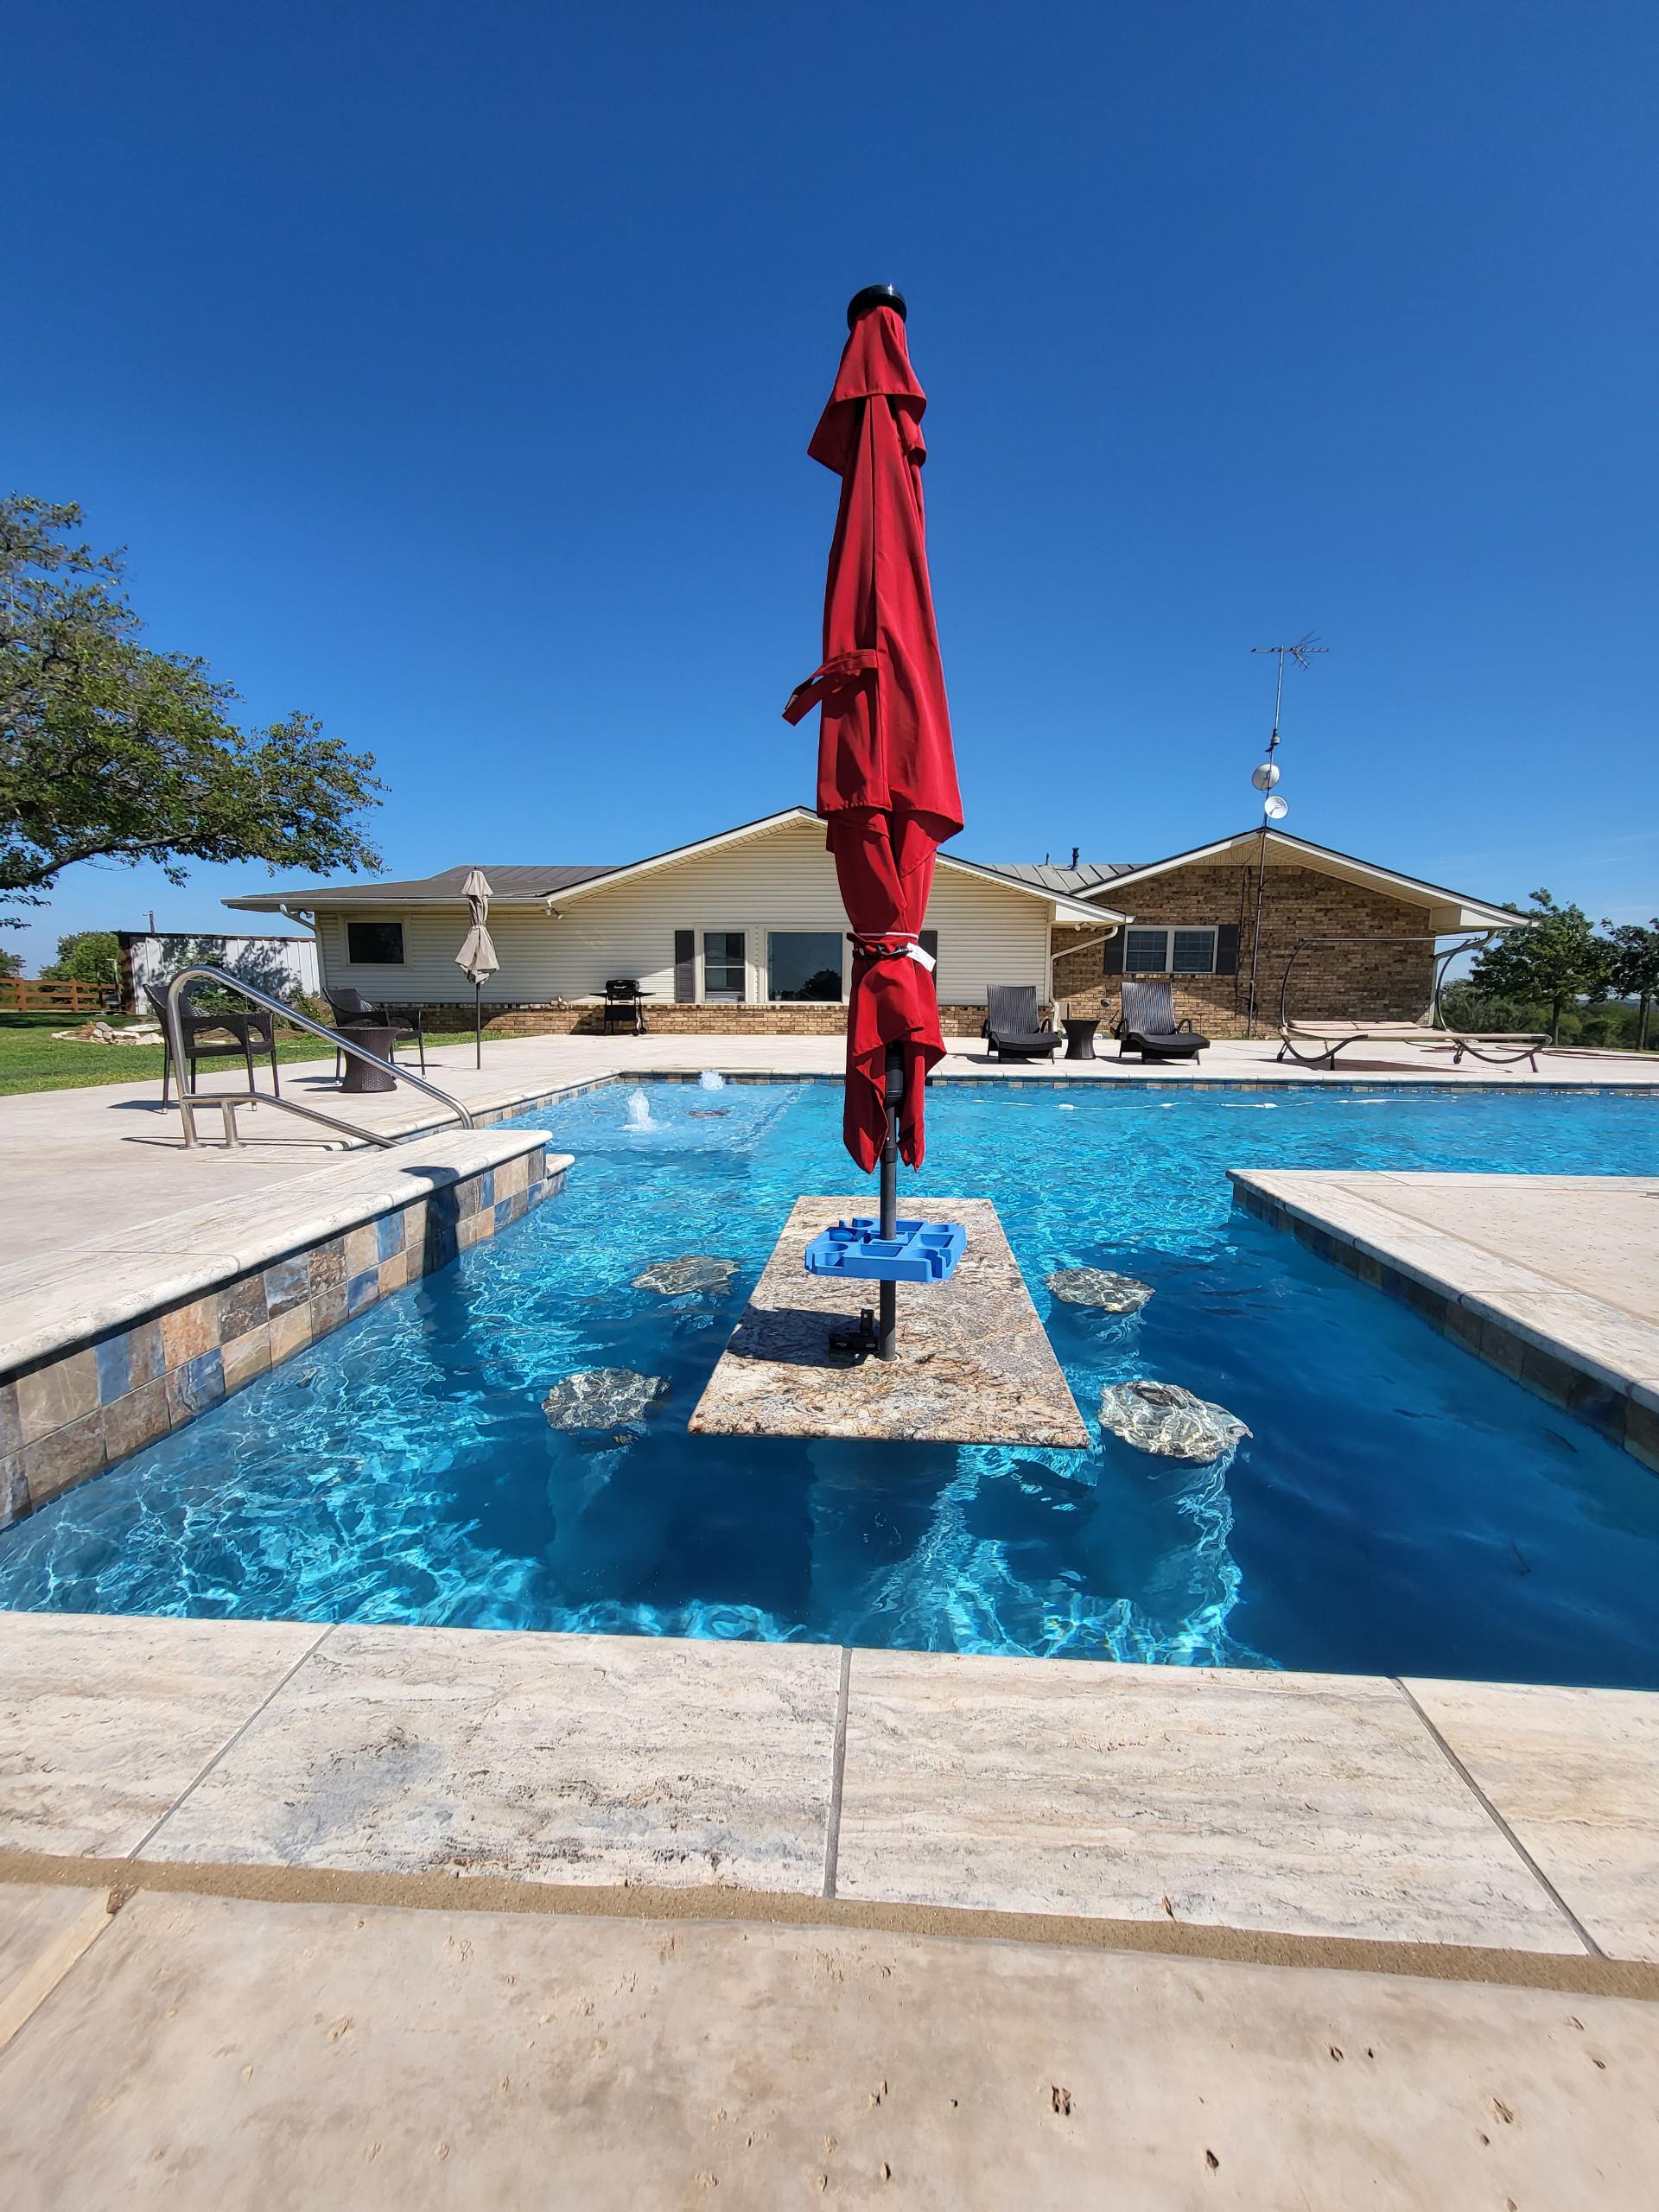 As a leading swimming pool contractor in Bowie, TX, Clearwater Pools & Services specializes in creating beautiful and functional swimming pools that become the centerpiece of your outdoor space.